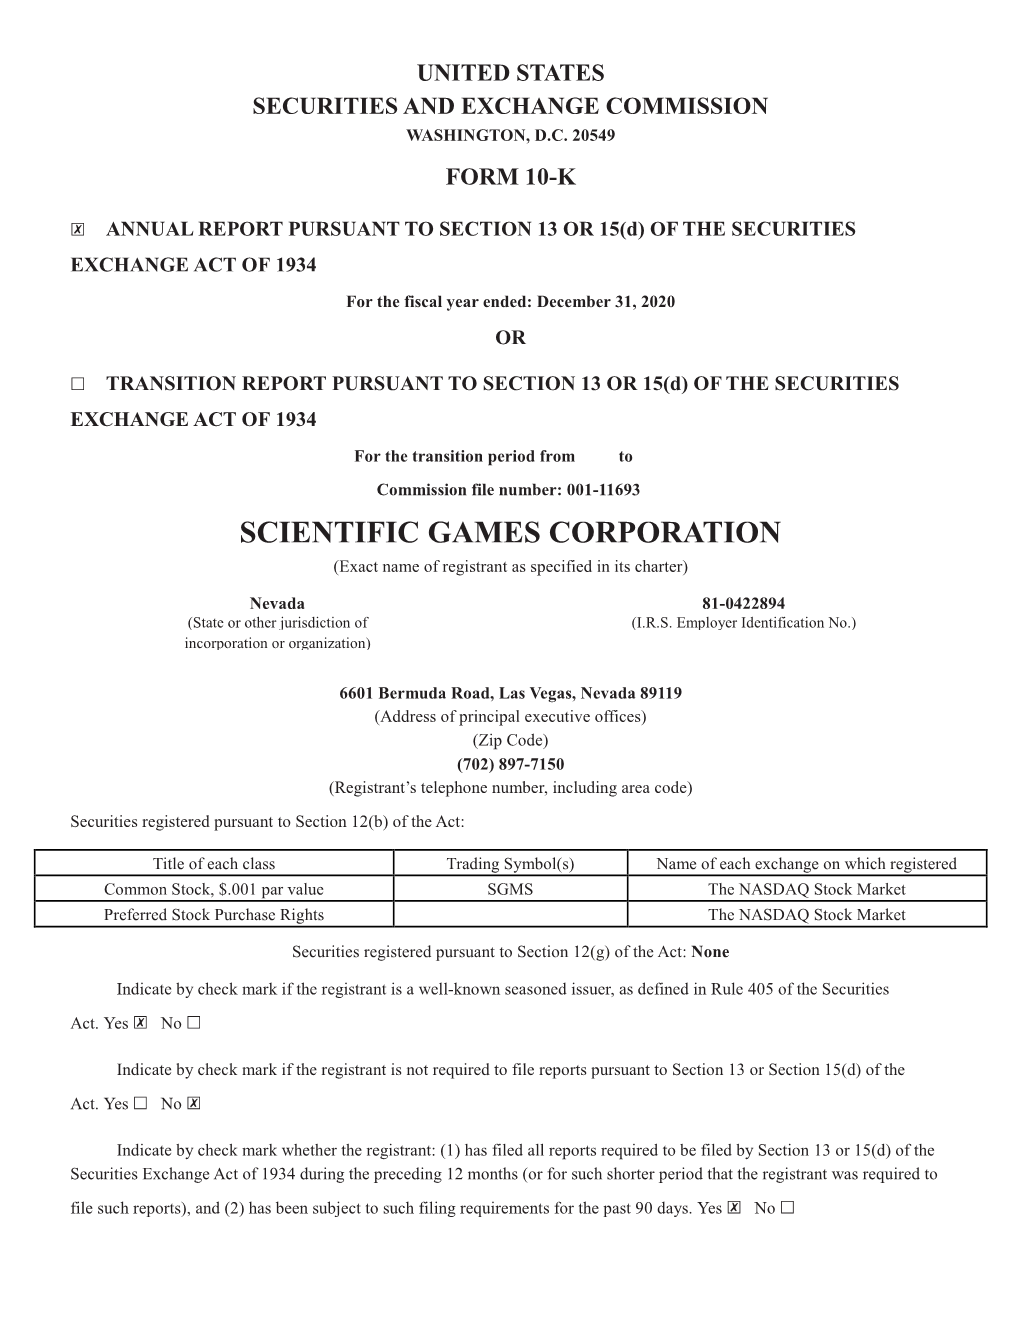 SCIENTIFIC GAMES CORPORATION (Exact Name of Registrant As Specified in Its Charter)